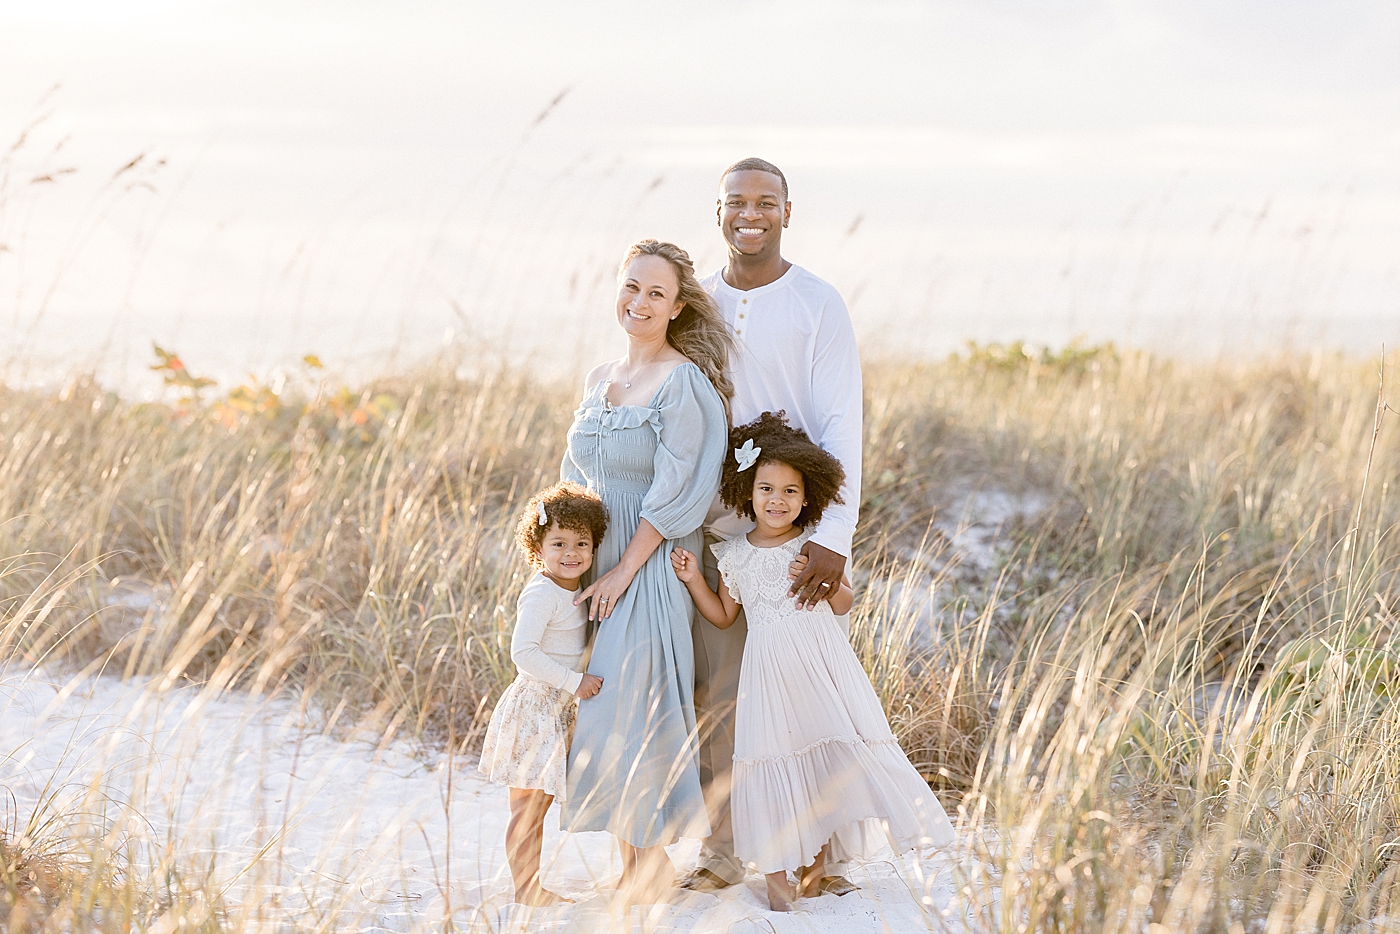 Sunset beach session for family of four. Photo by Brittany Elise Photography.